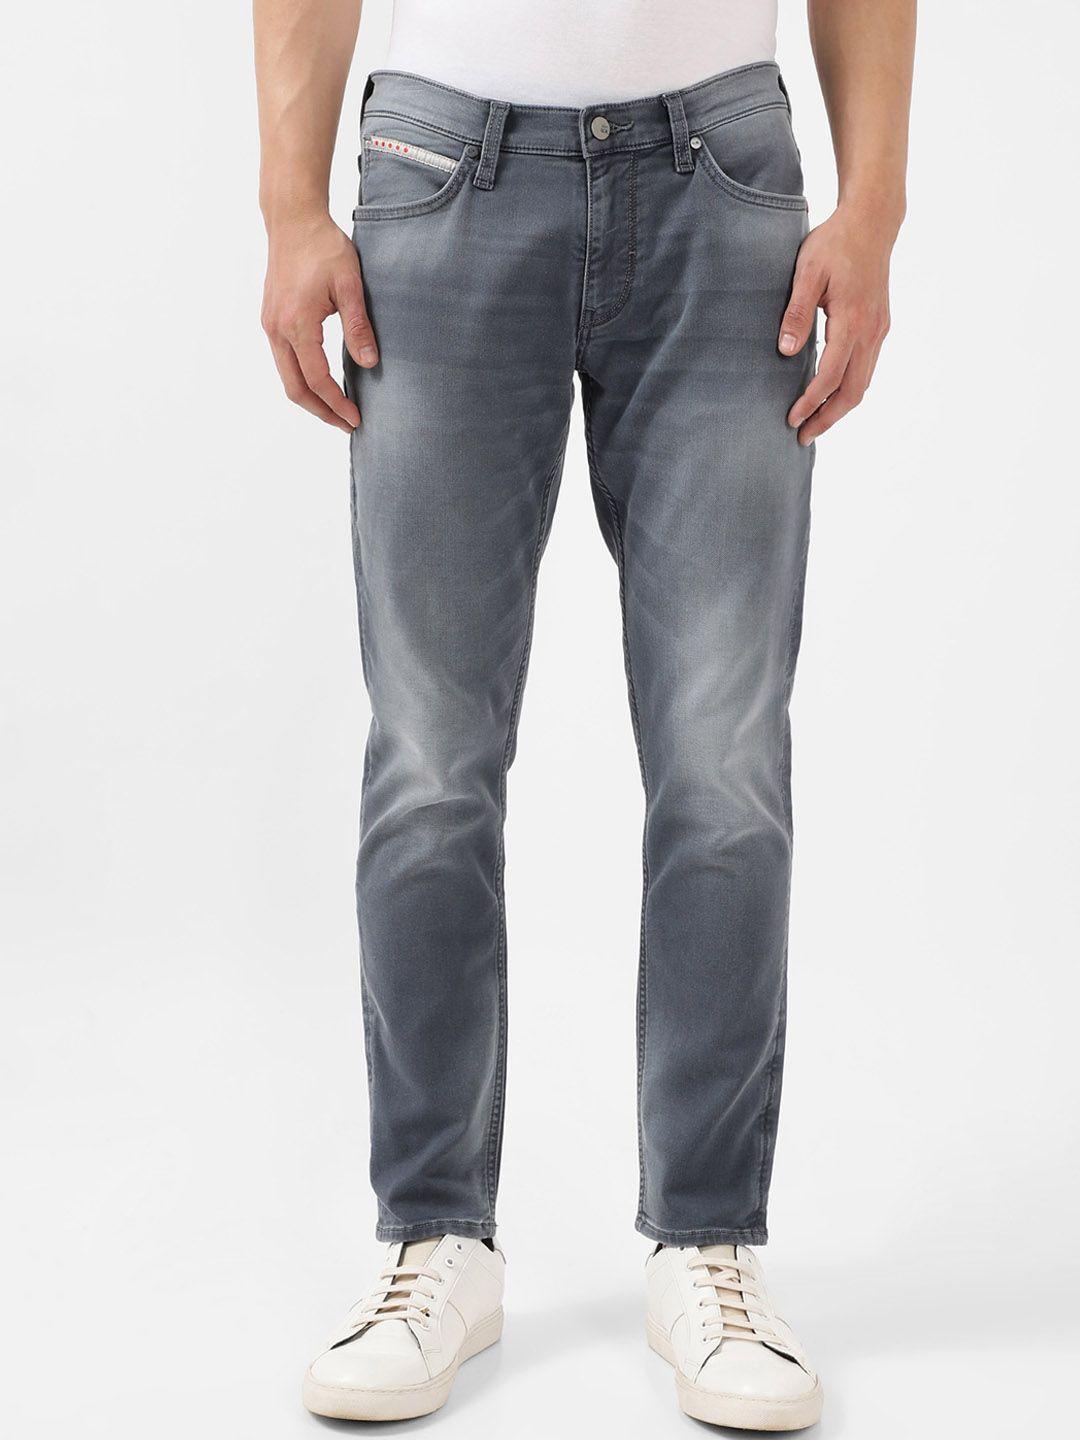 lee-men-skinny-fit-heavy-fade-stretchable-cotton-jeans